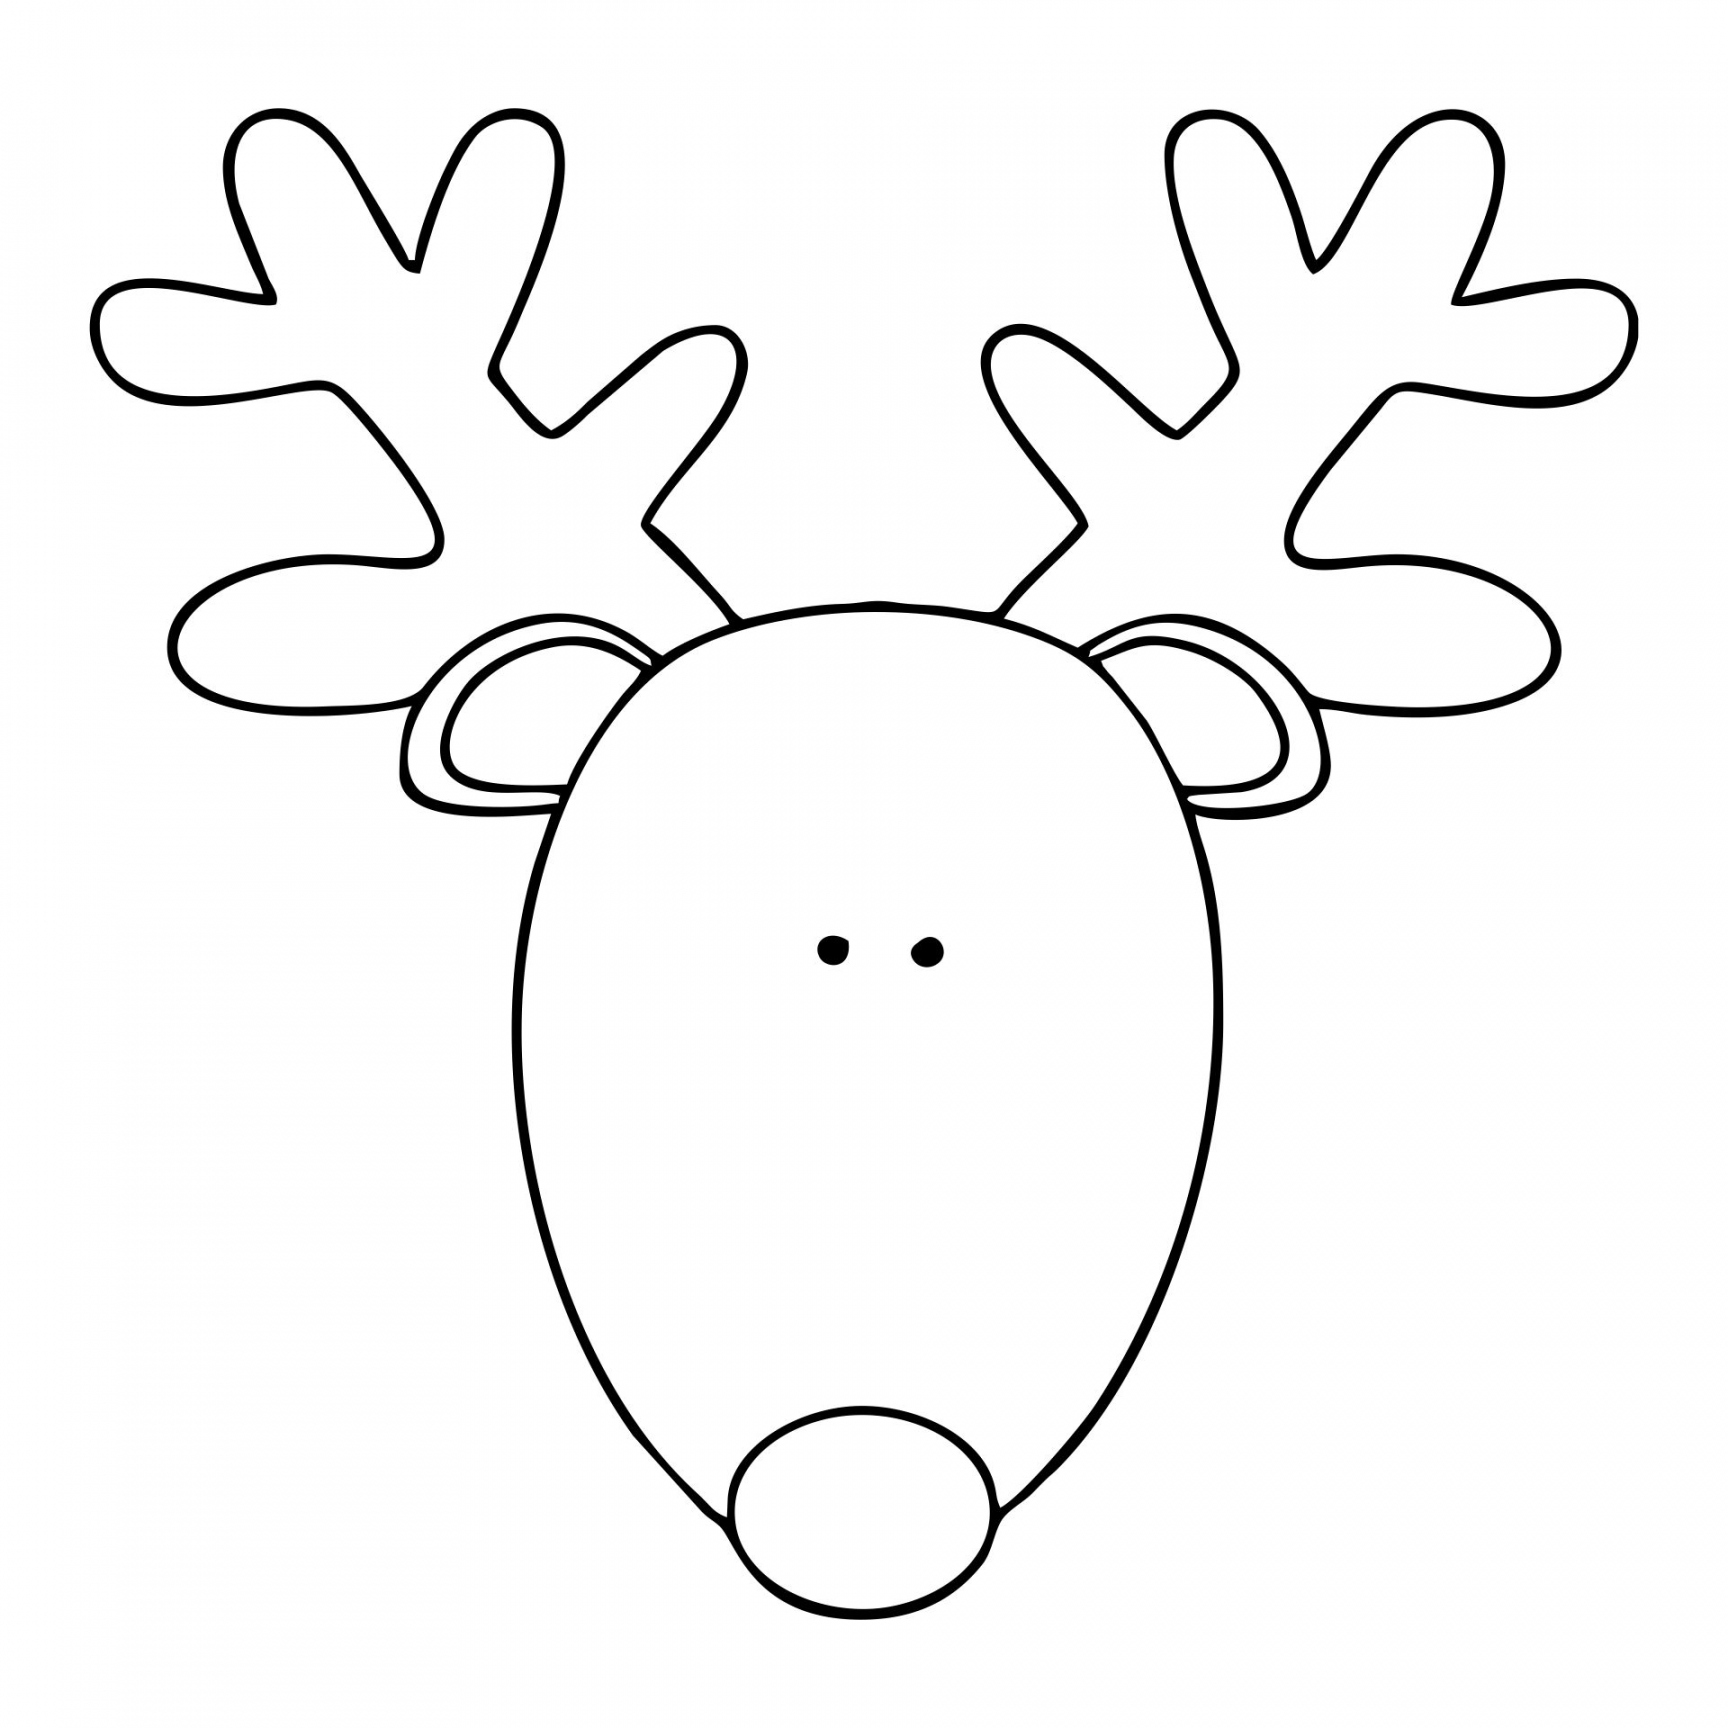 Pin on Contest - FREE Printables - Reindeer Head Template